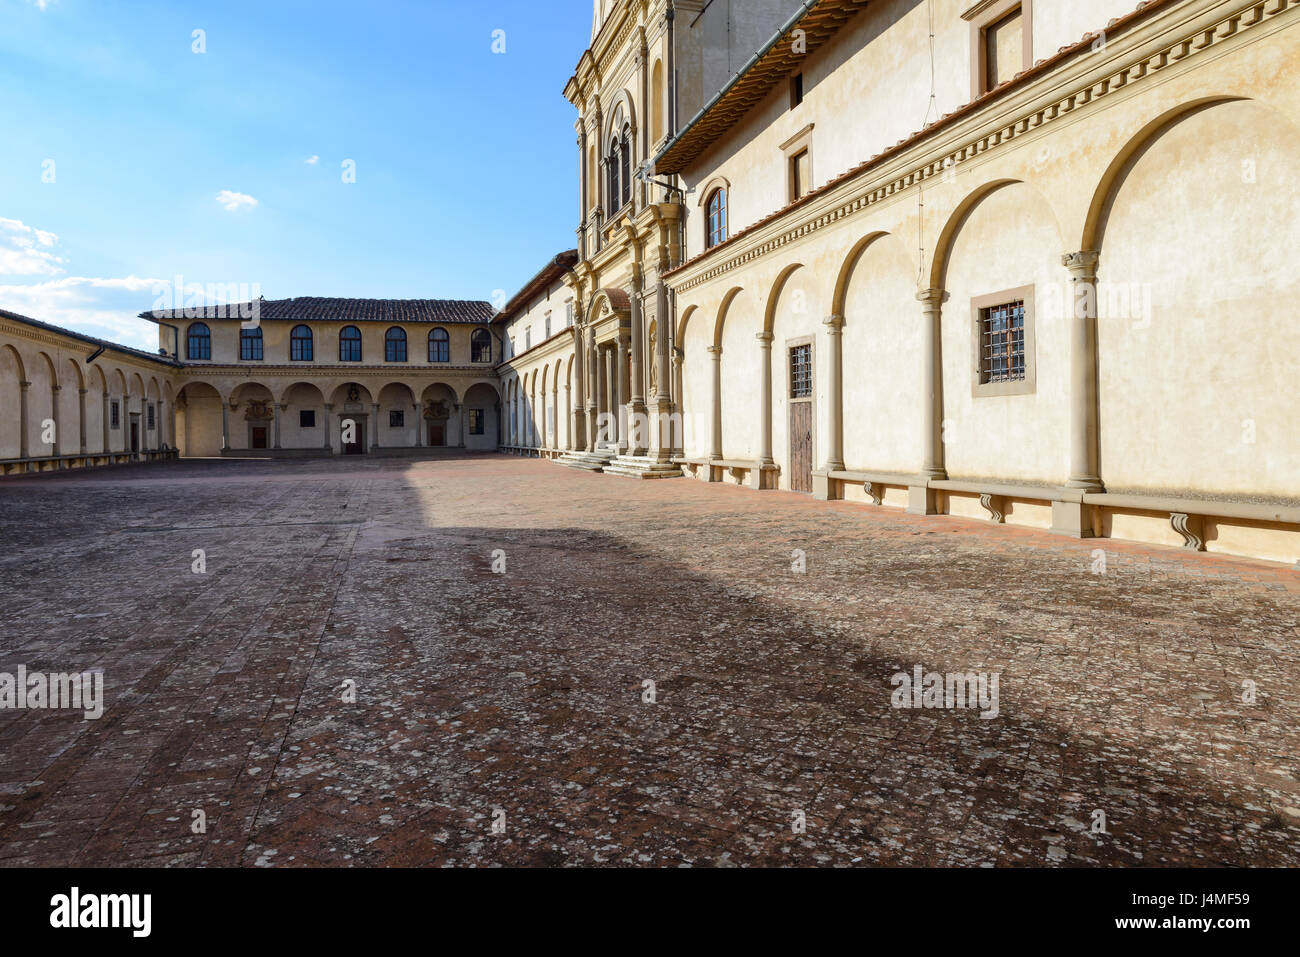 Florence Charterhouse, Certosa di Firenze or Certosa del Galluzzo is a charterhouse, or Carthusian monastery, located in the Florence suburb of Galluz Stock Photo